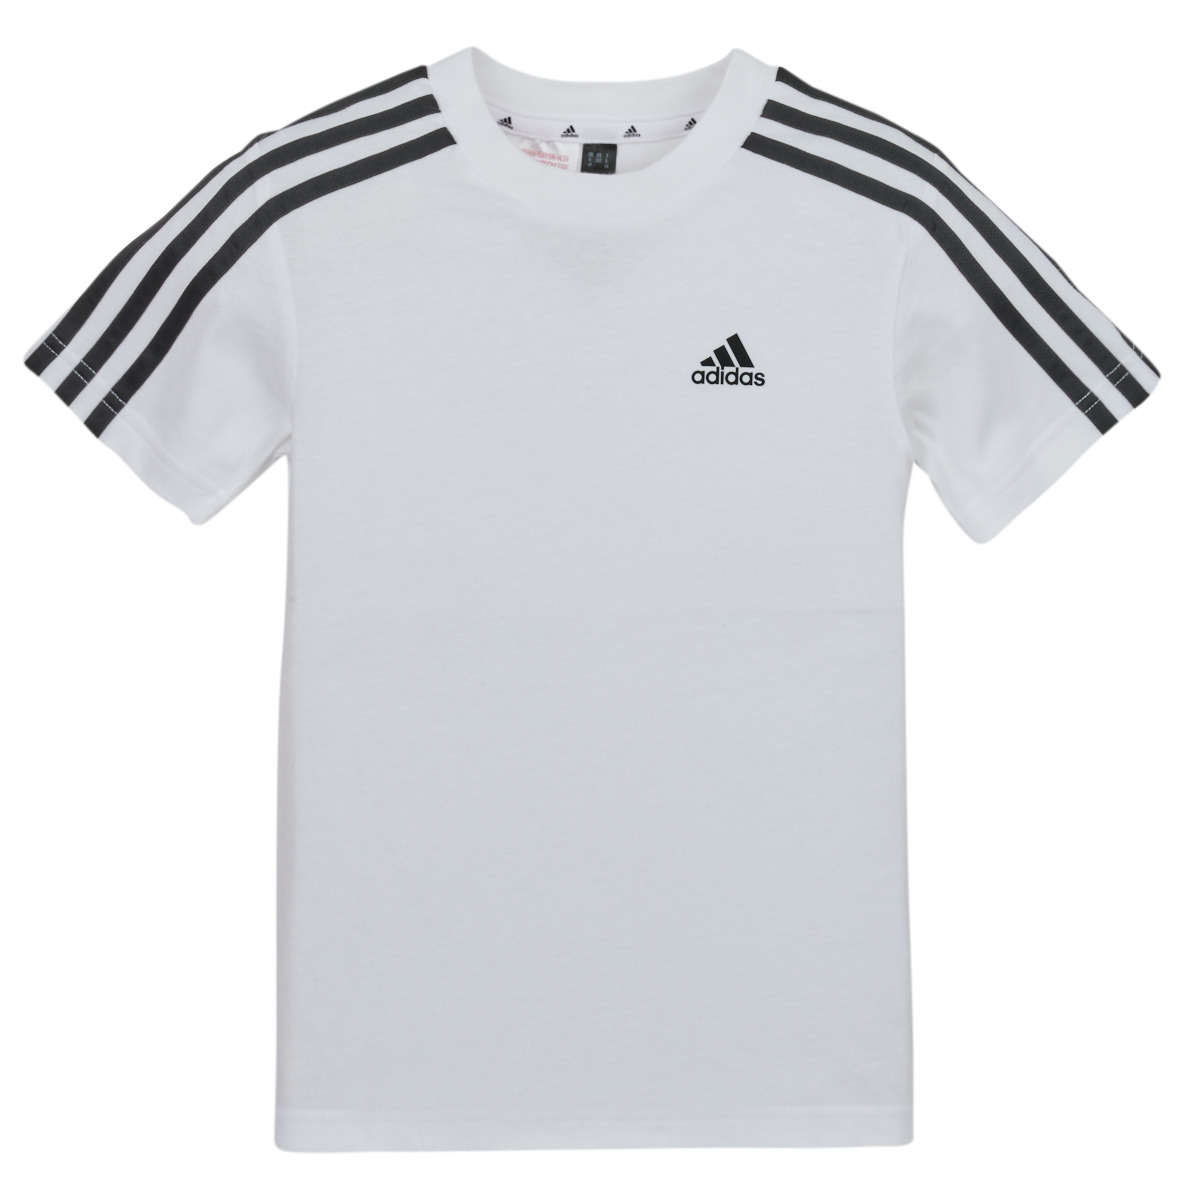 Adidas Sportswear LK 3S CO TEE White - Free Delivery with Rubbersole.co.uk  ! - Clothing Short-sleeved t-shirts Child £